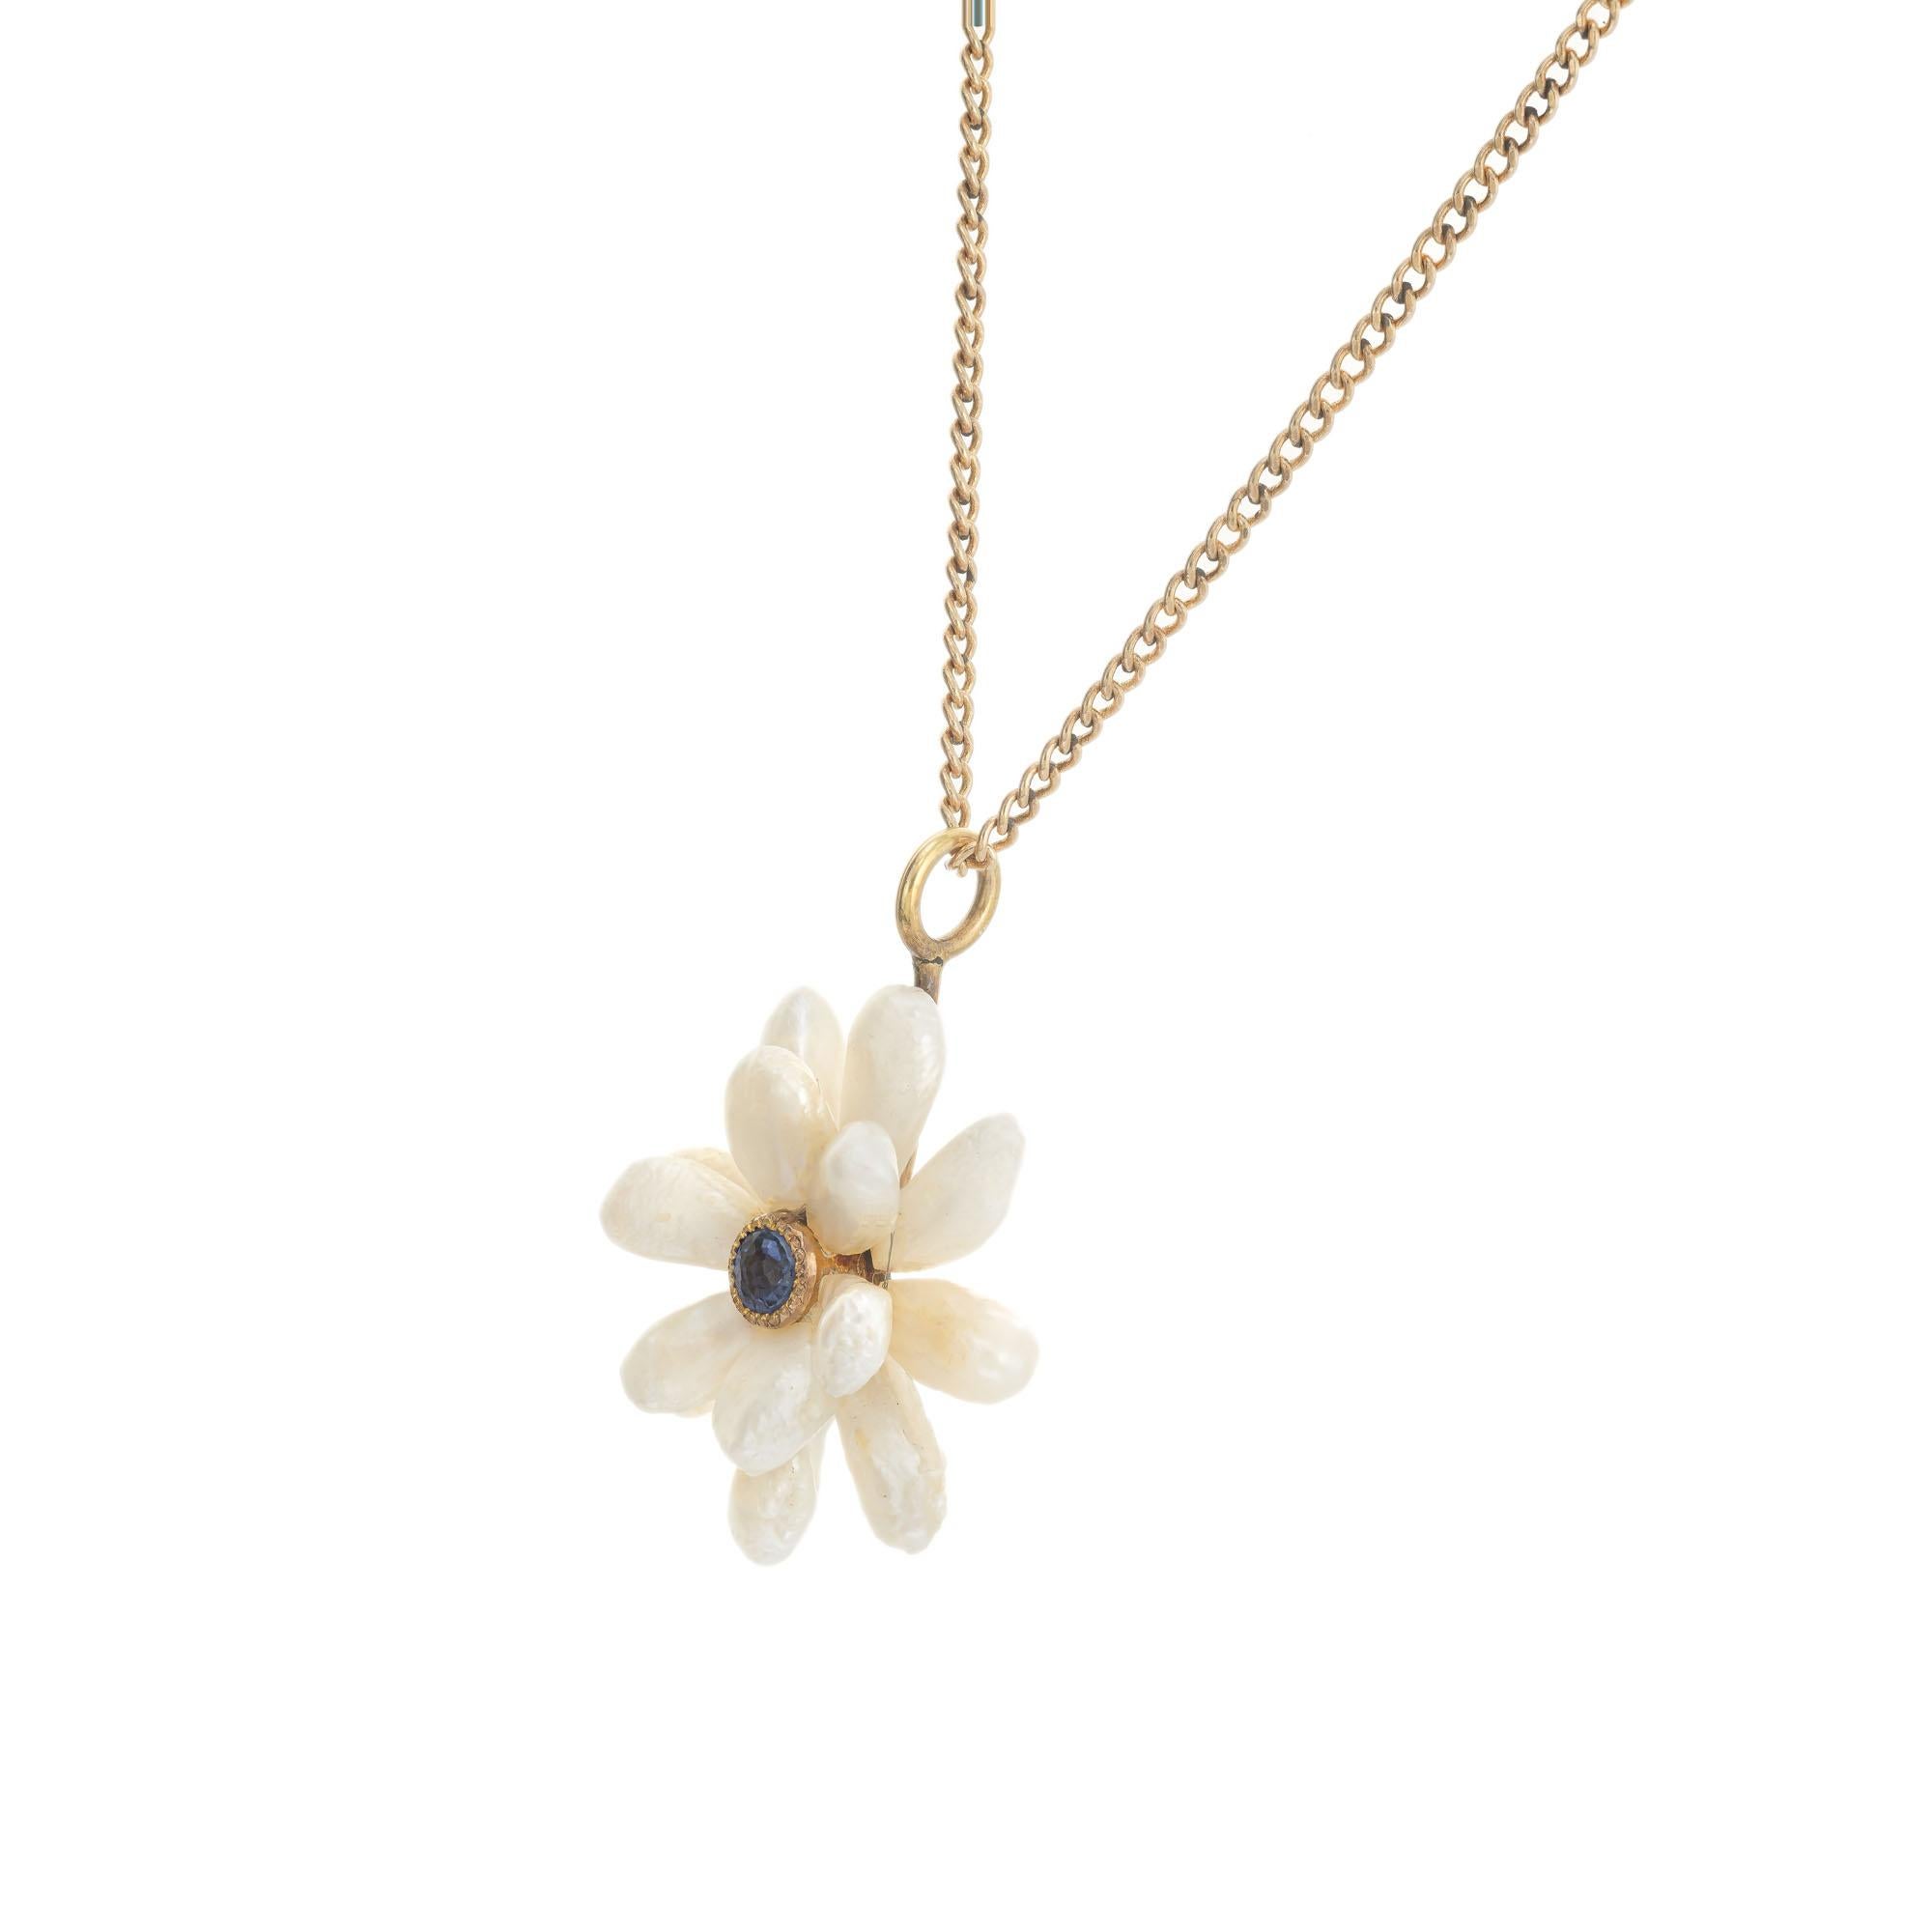 1960's freshwater Baroque pearl and sapphire flower pendant necklace. GIA Certified 14 natural baroque freshwater pearls with around center Montana sapphire, in 14k yellow gold. 19 inches in length

14 natural white freshwater baroque pearls,